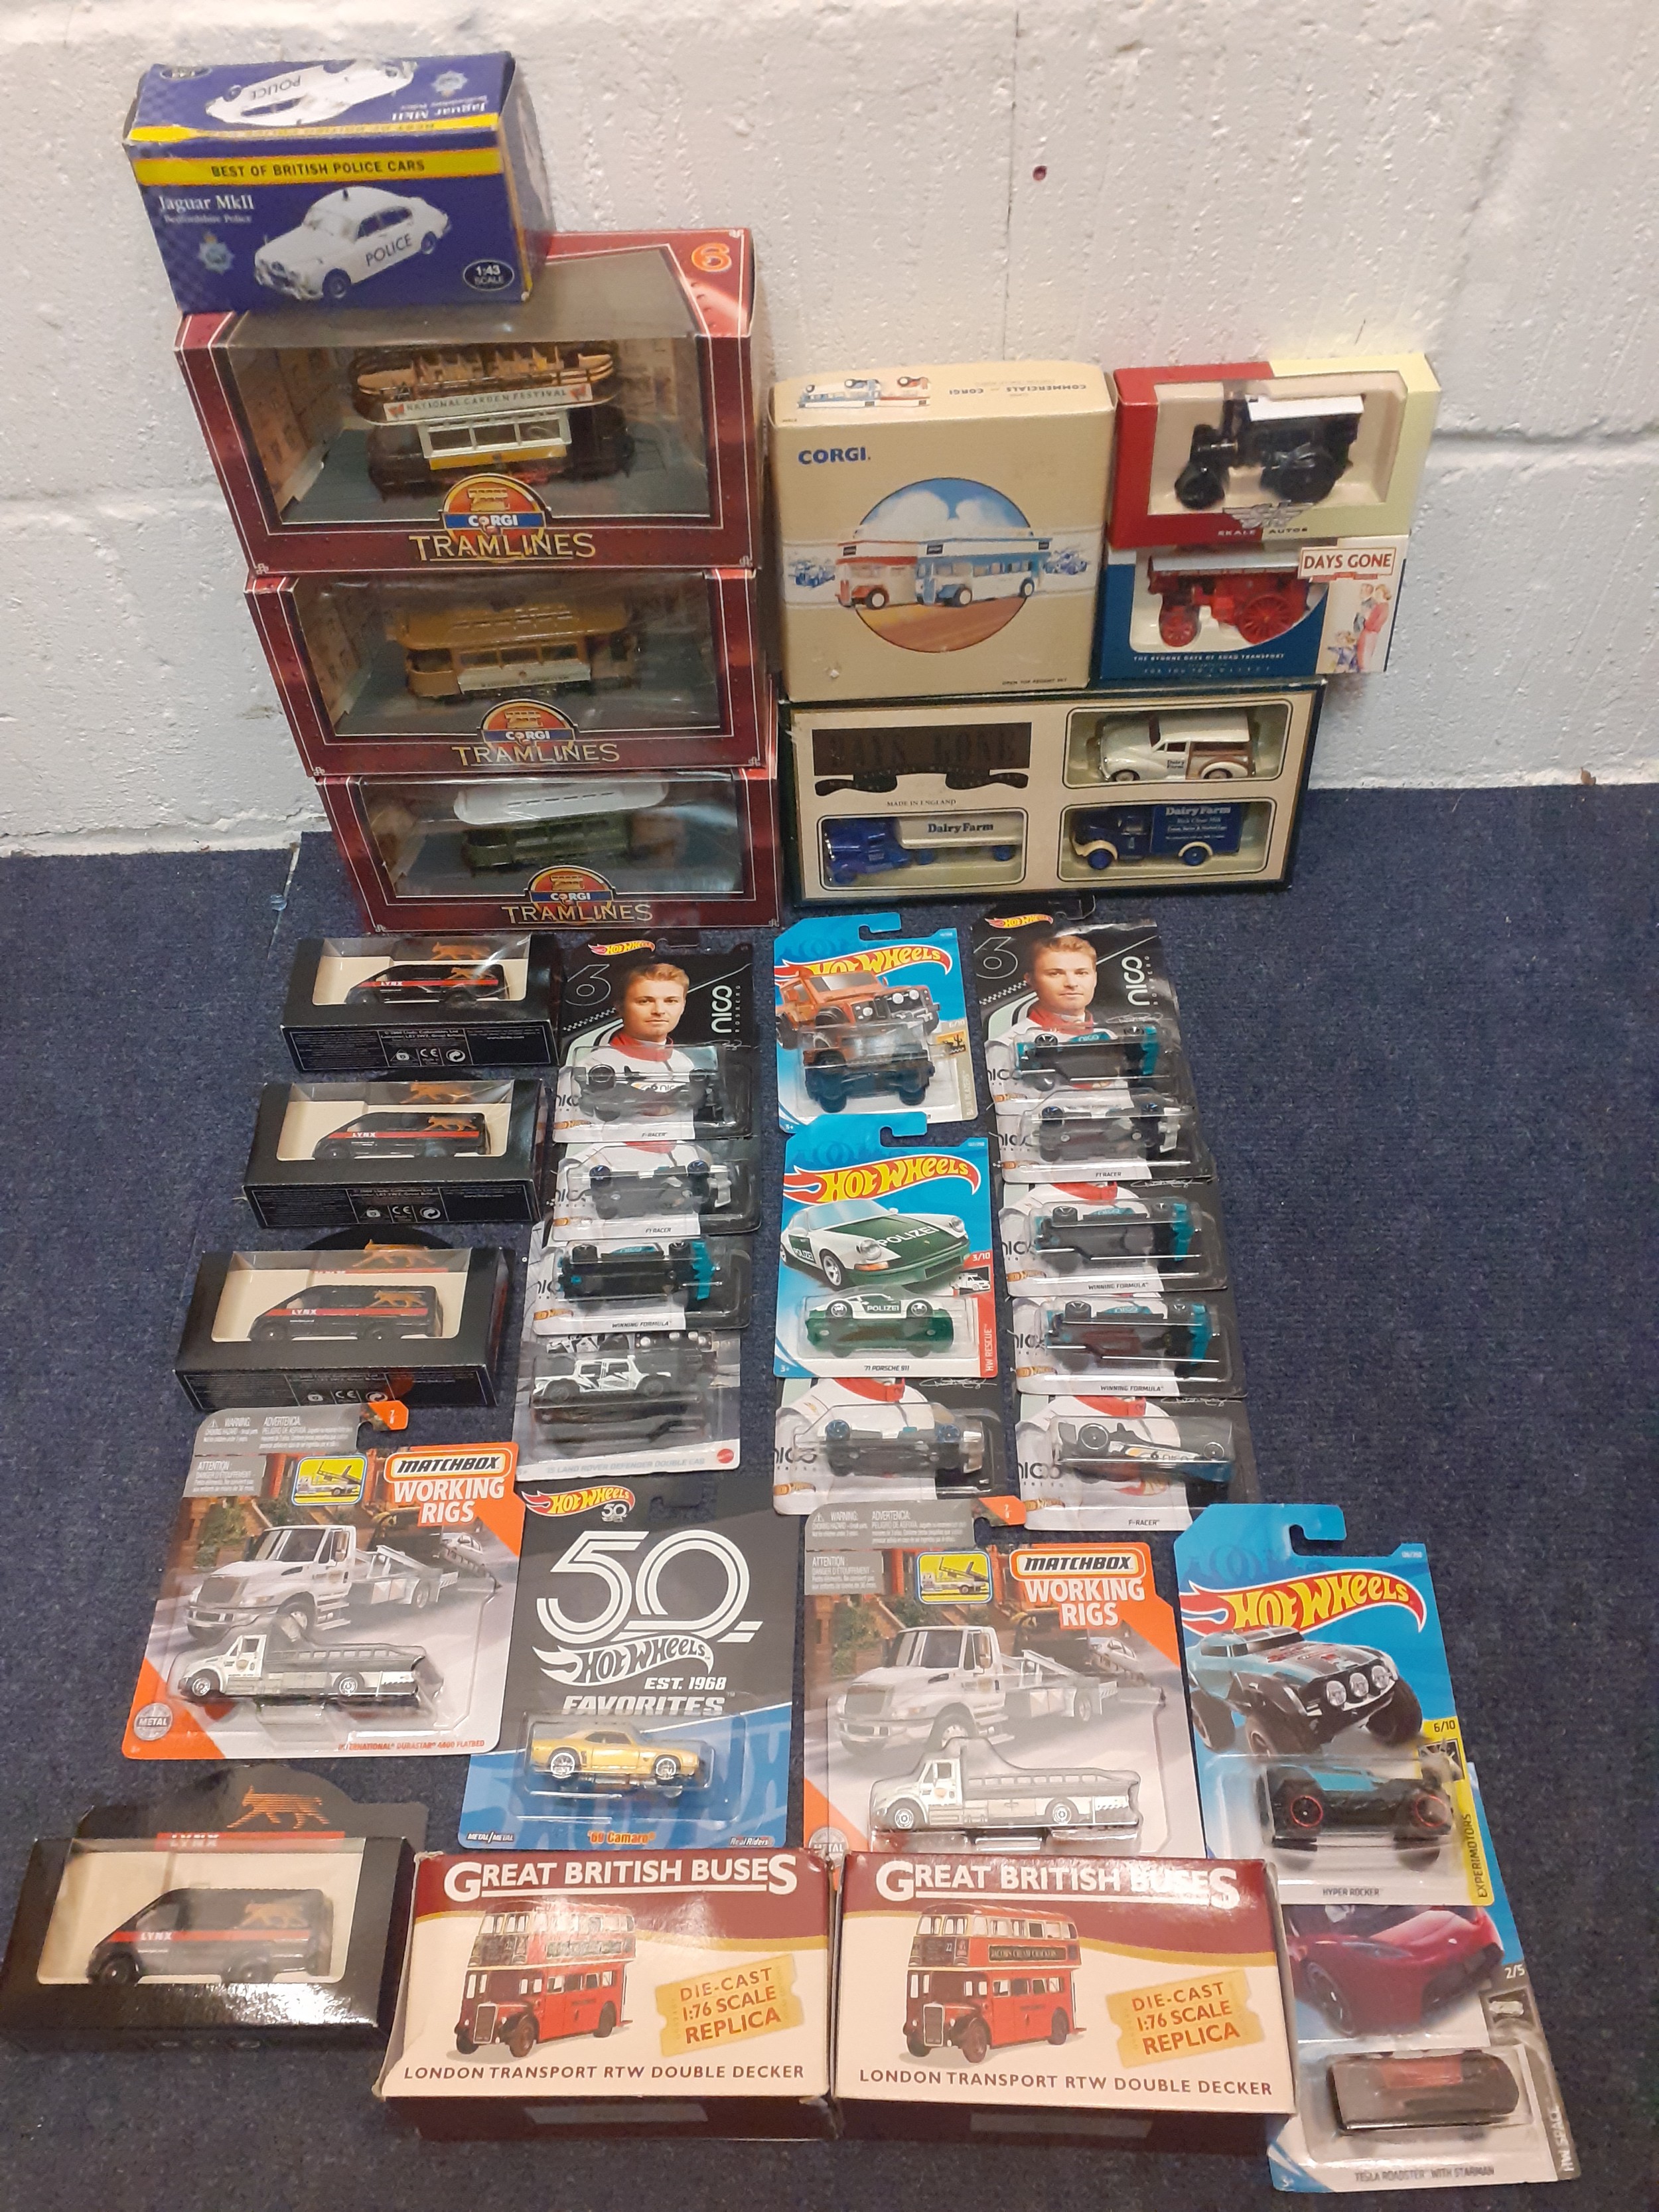 A quantity of die cast collectors vehicles to include Hot Wheels, Corgi buses and Tramlines, Days